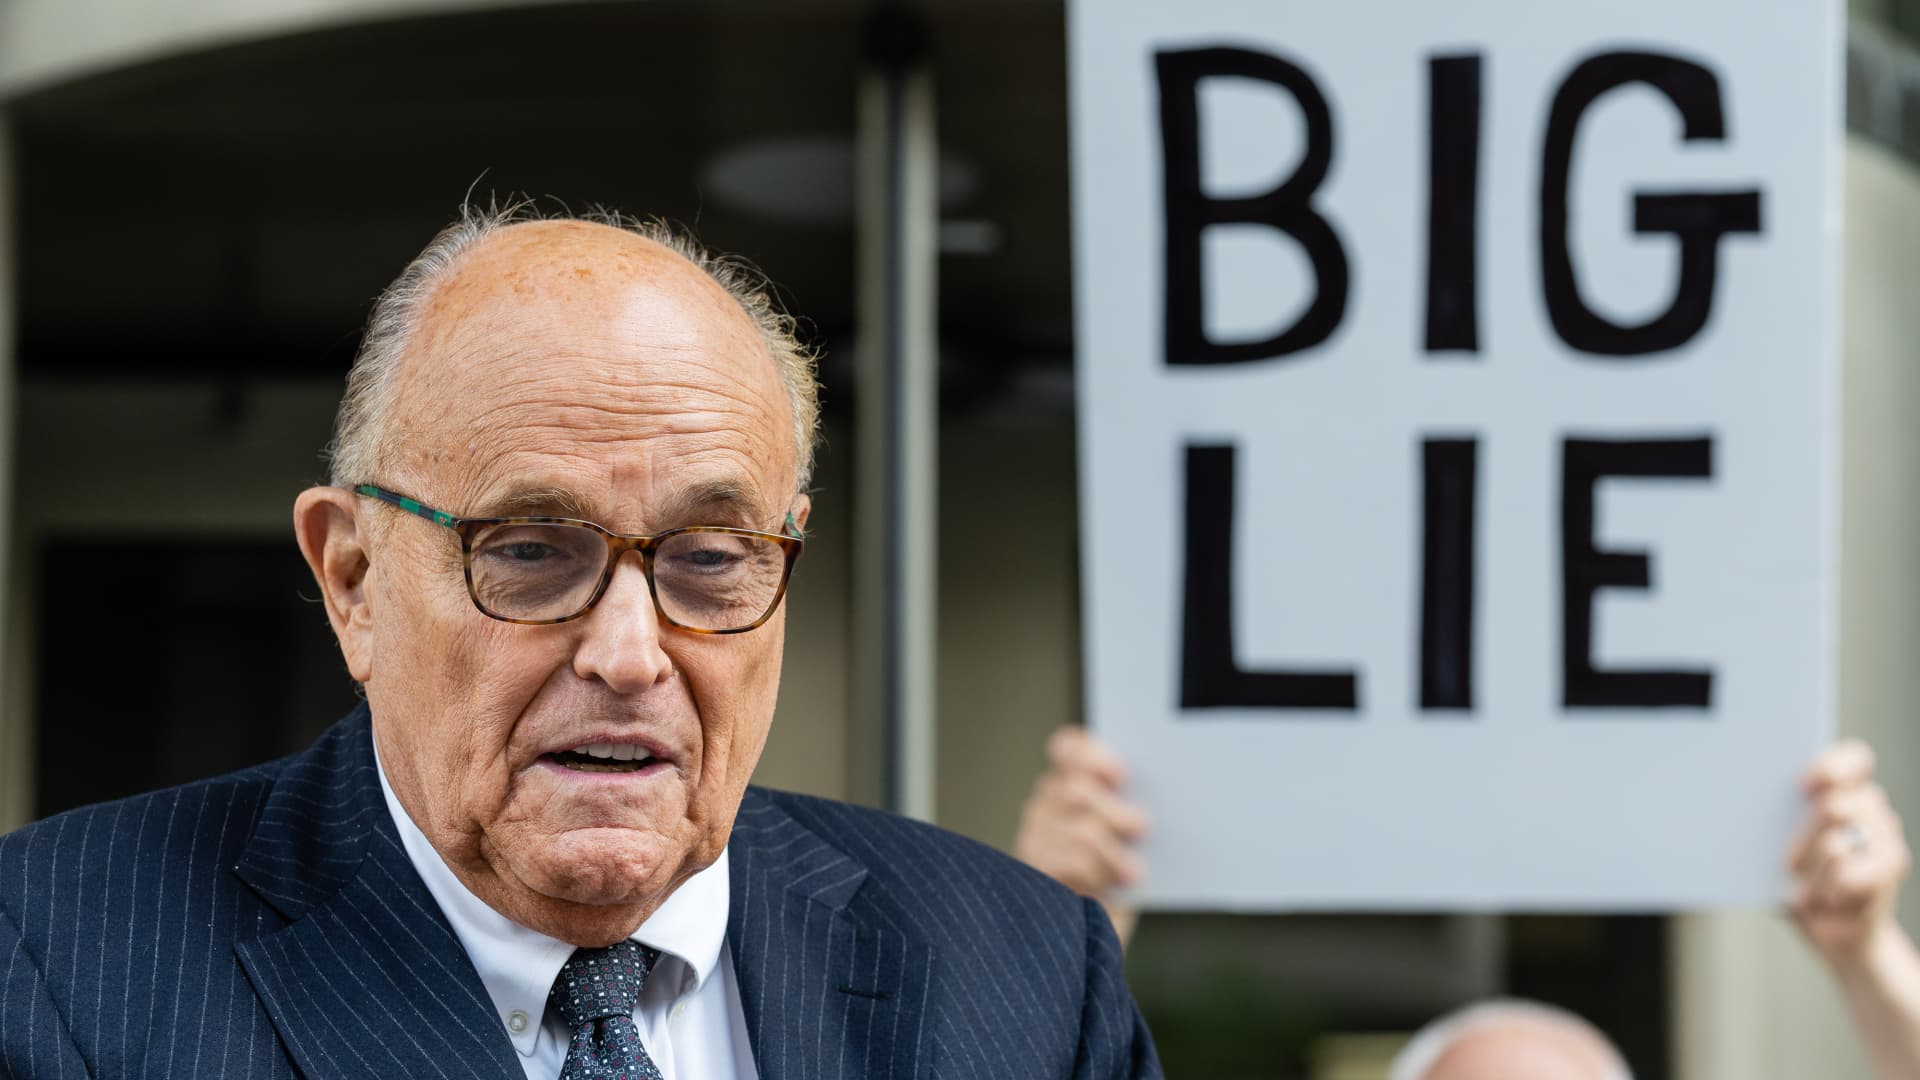 Rudy Giuliani, former lawyer to Donald Trump, speaks to members of the media as he leaves federal court in Washington, DC, US, on Friday, May 19, 2023.